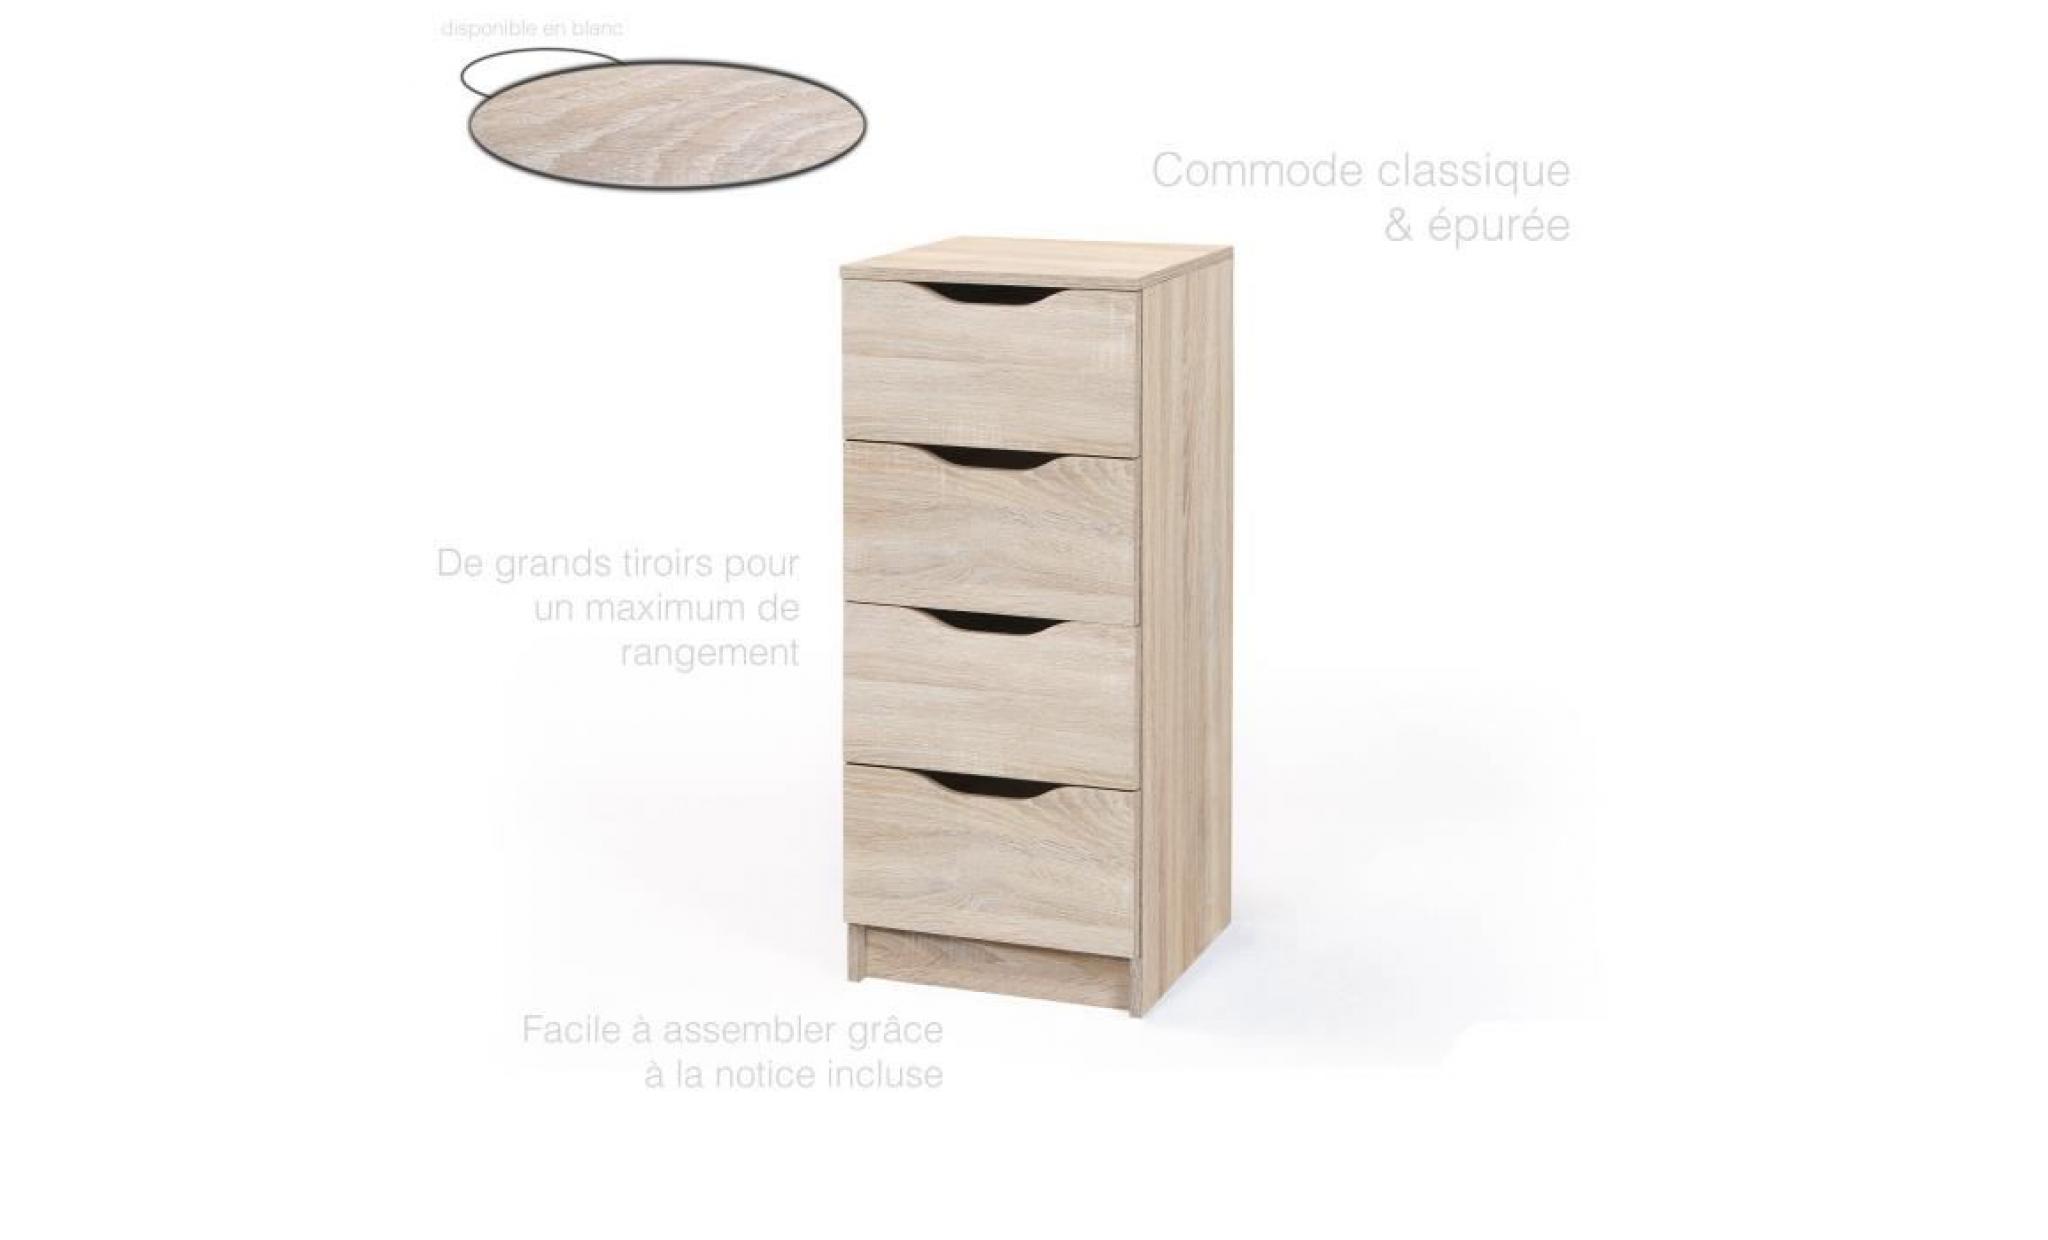 commode 4 tiroirs, commode chambre chene, commode enfant, commode haute, chene sonoma, commode pas cher, commode chambre adulte